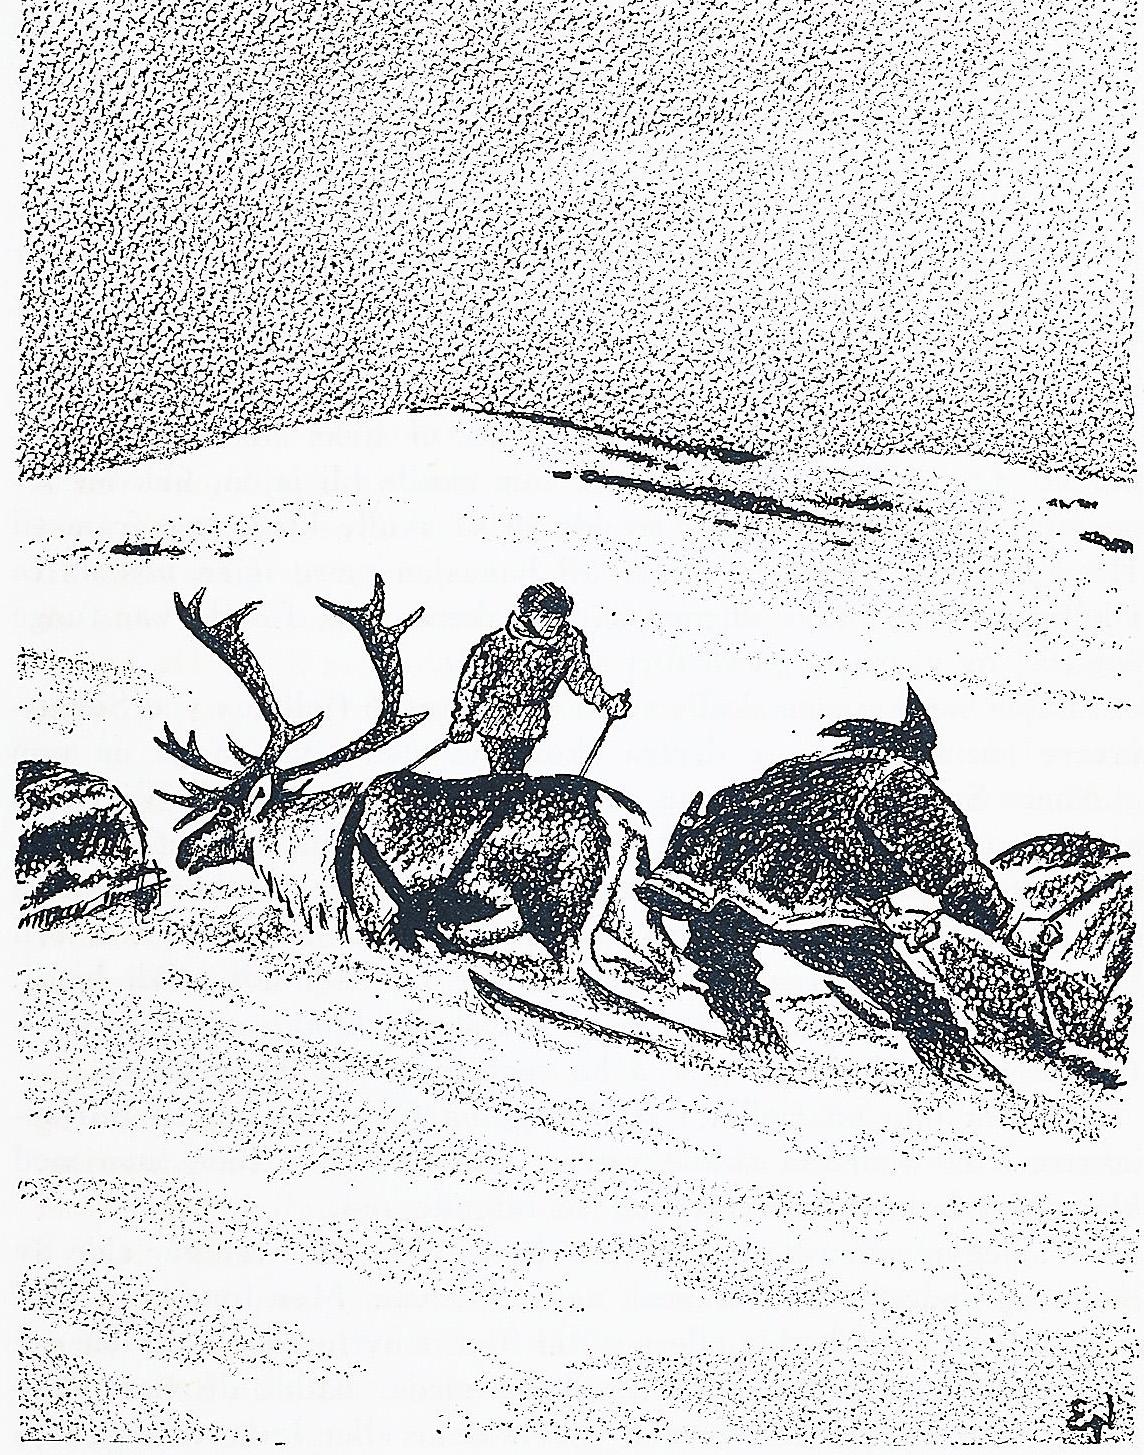 Hunting Reindeer from the Rocks and Winter Scene of Reindeer Pulling a Sled - Realist Print by Unknown